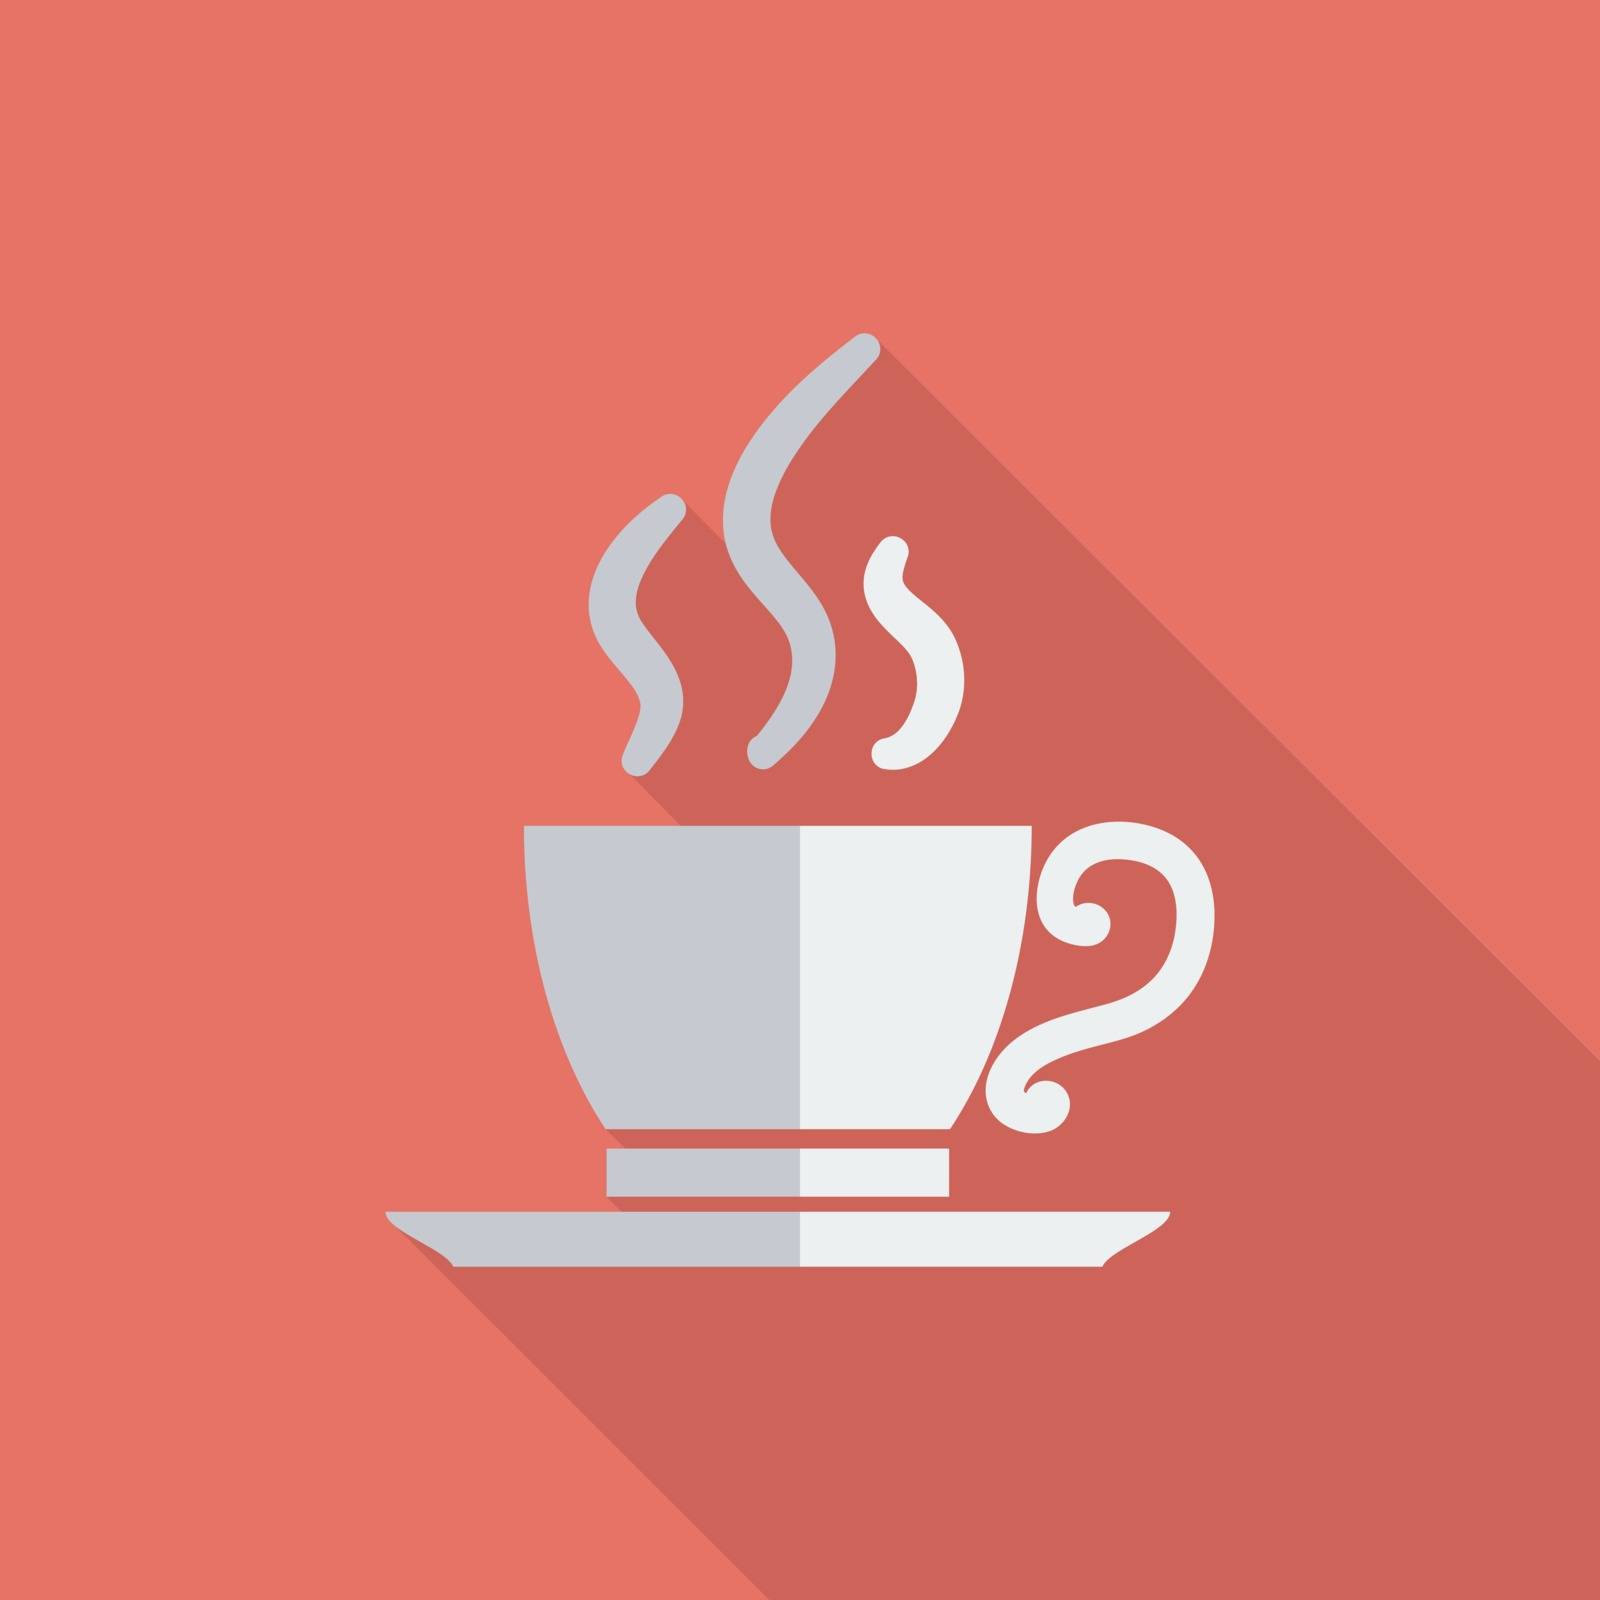 Cafe icon. Flat vector related icon with long shadow for web and mobile applications. It can be used as - logo, pictogram, icon, infographic element. Vector Illustration.